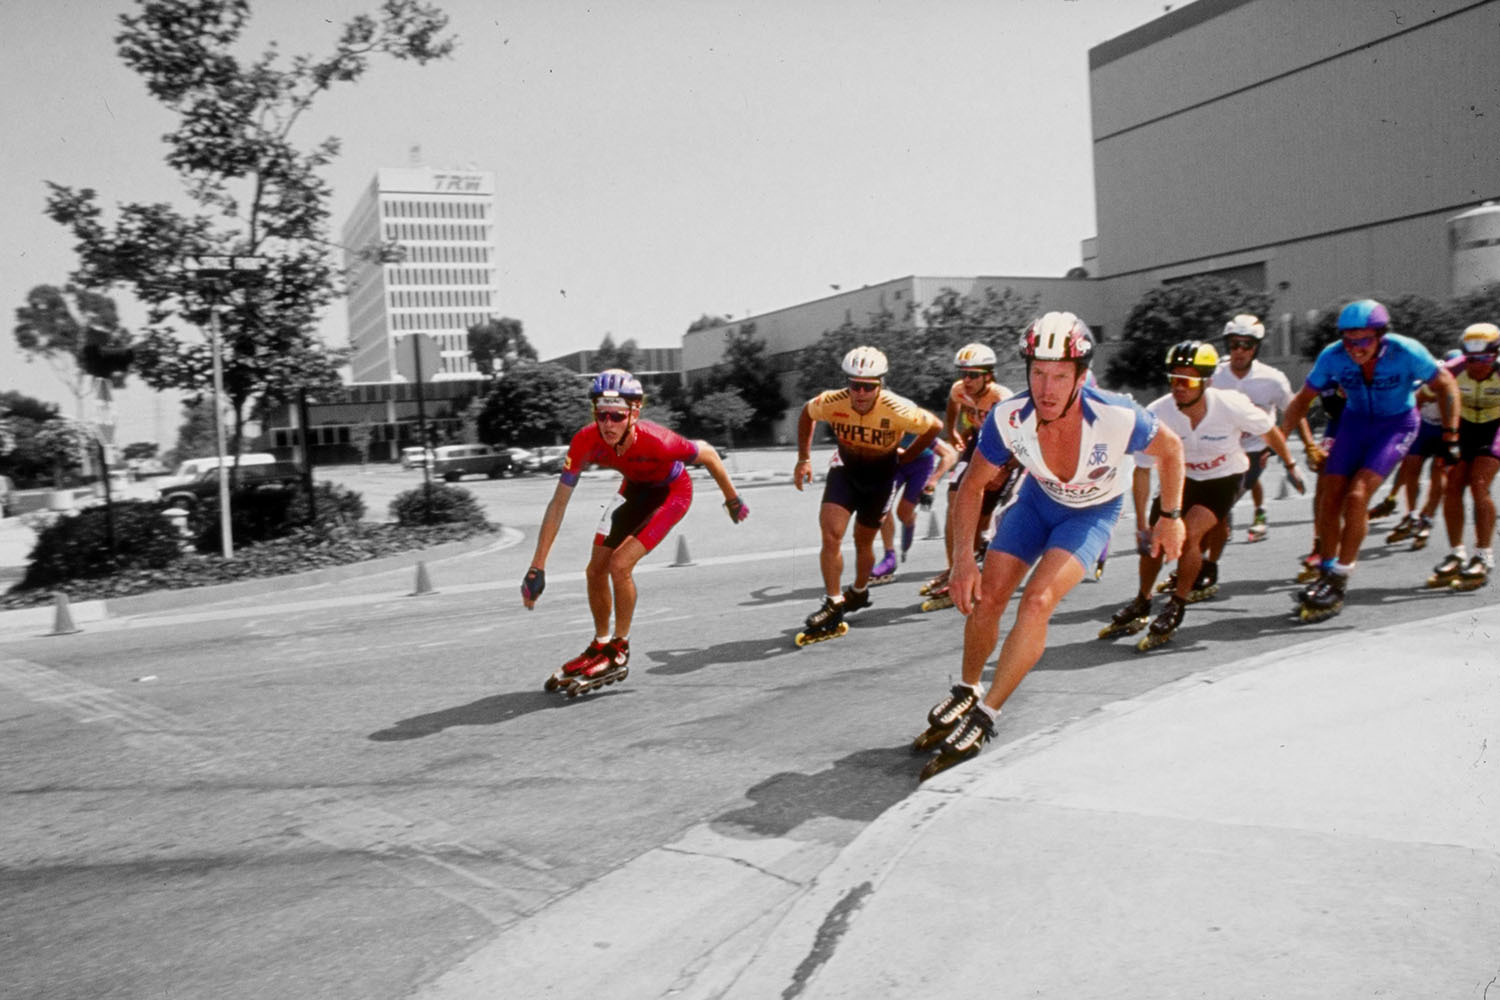 Why Rollerblading Is Making a Comeback During the COVID Crisis